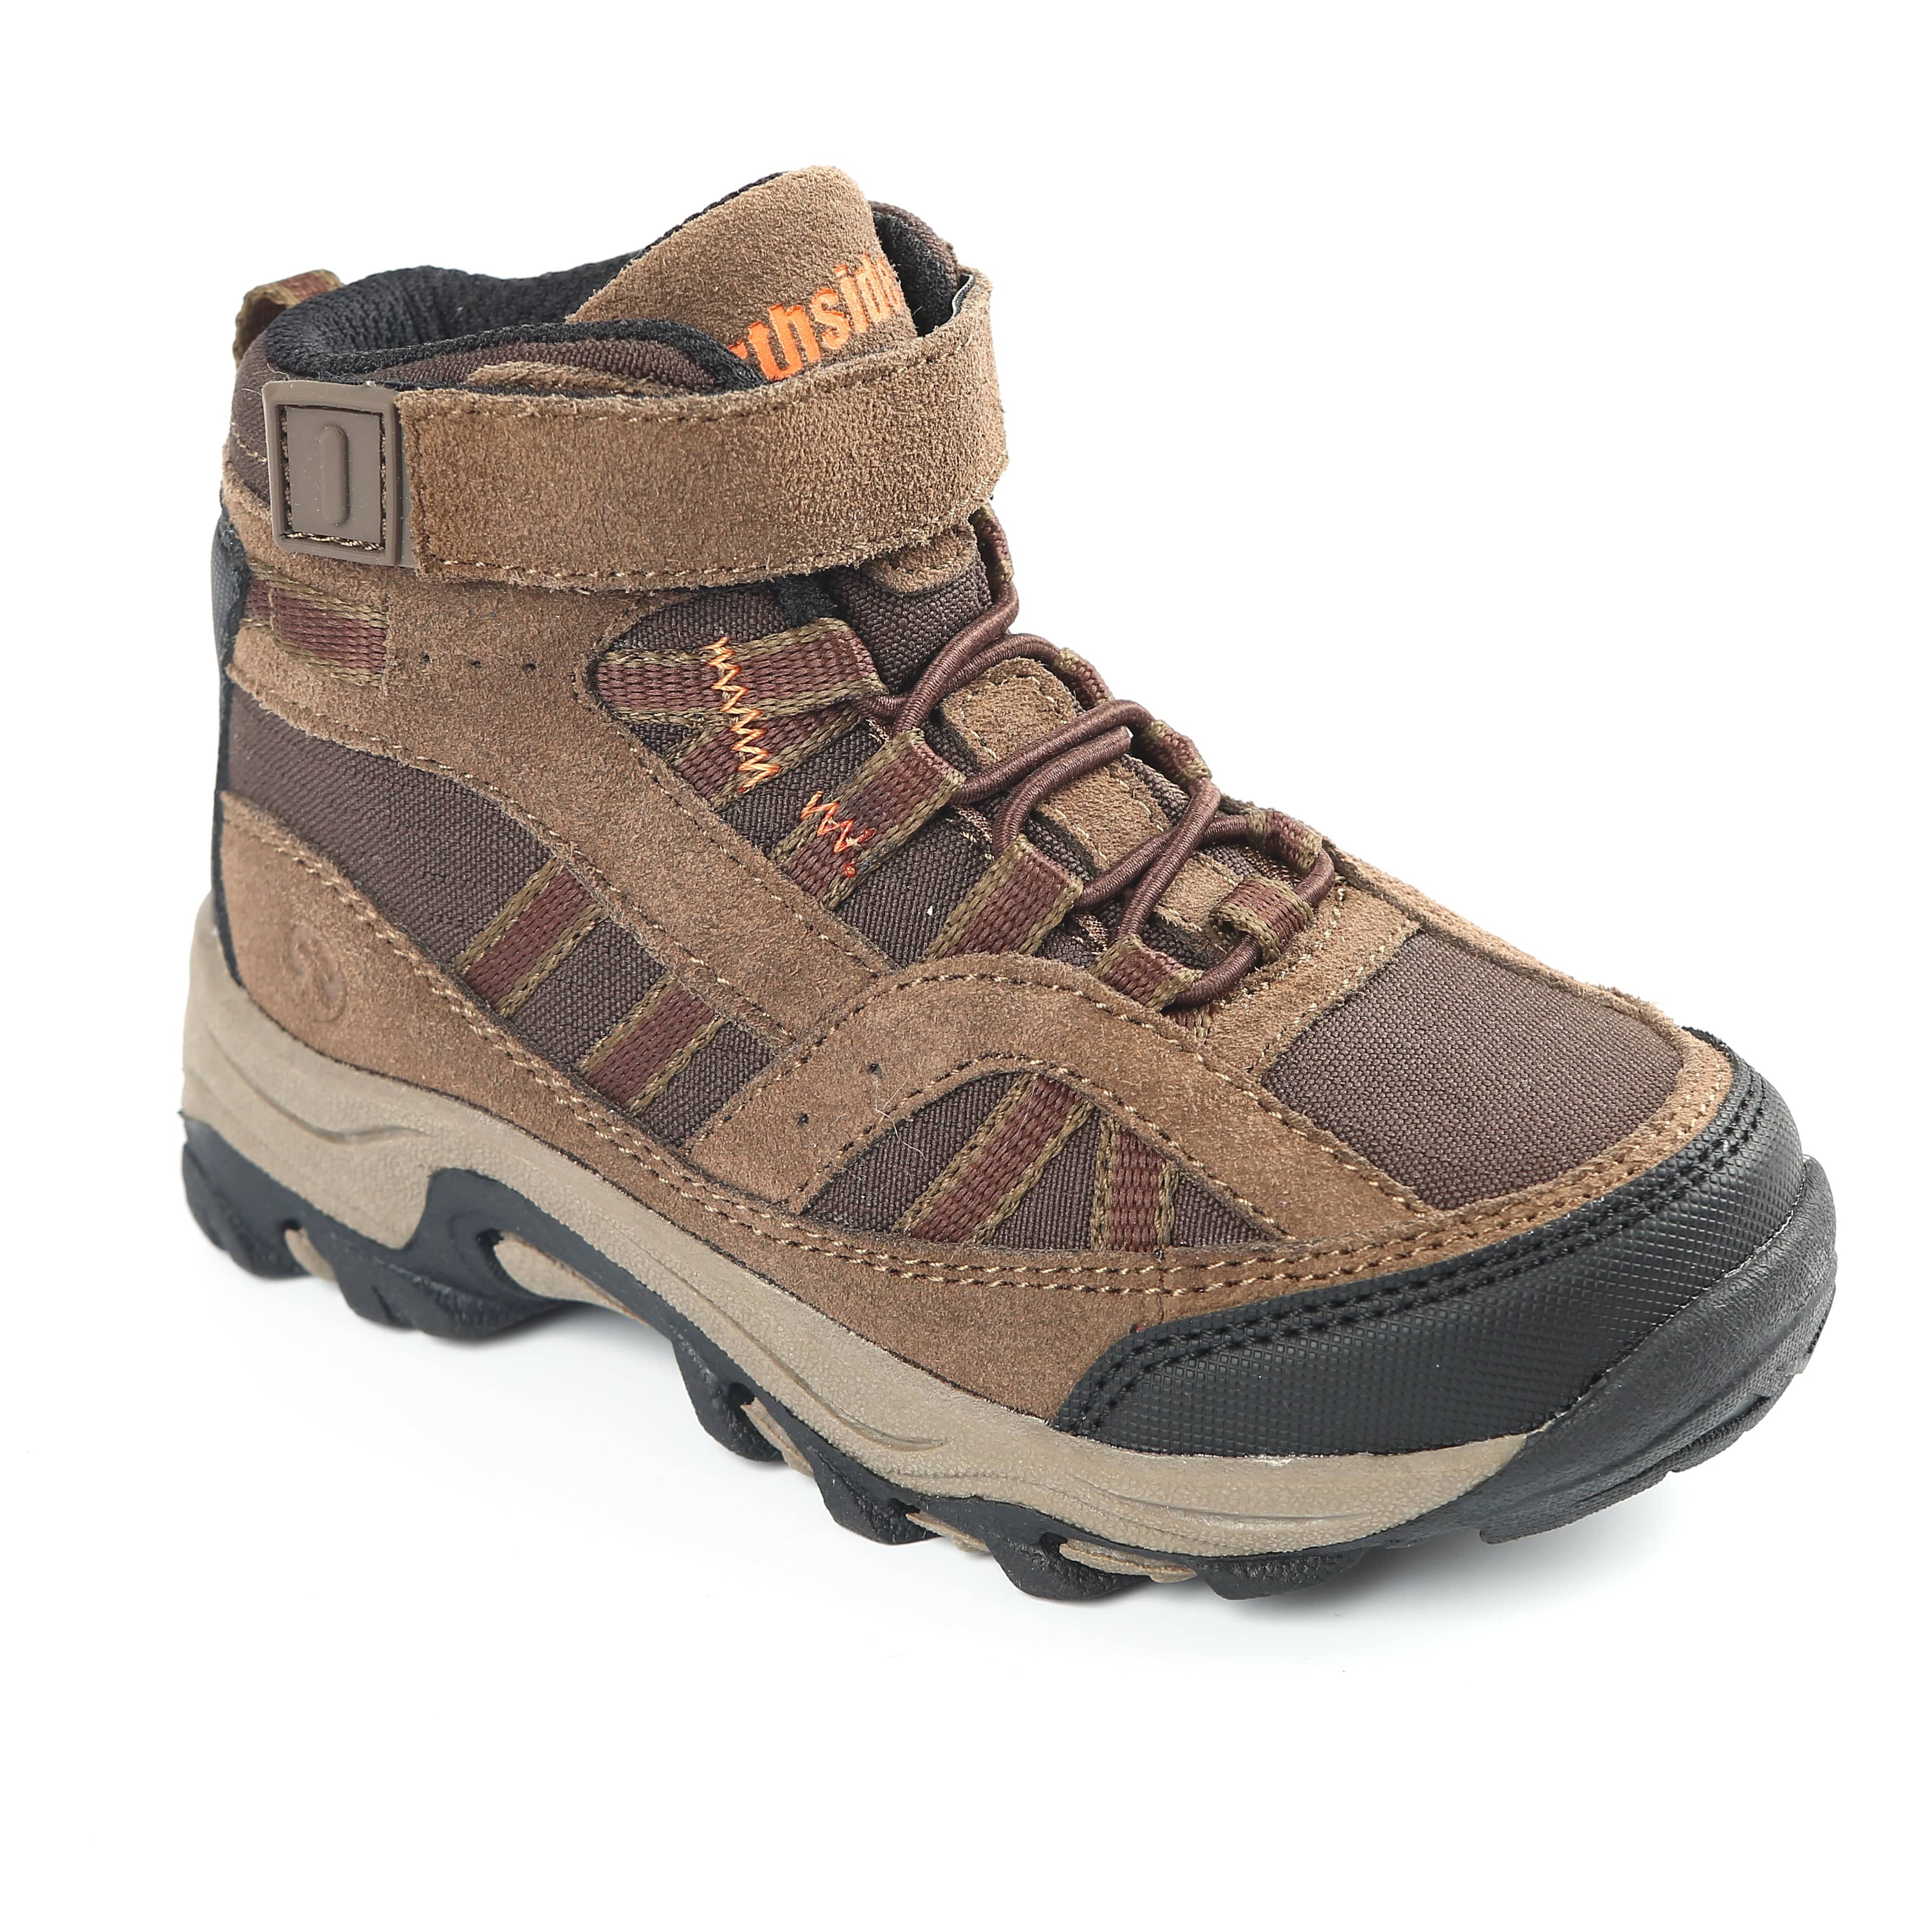 Toddler's Rampart Mid Hiking Boot - Northside USA